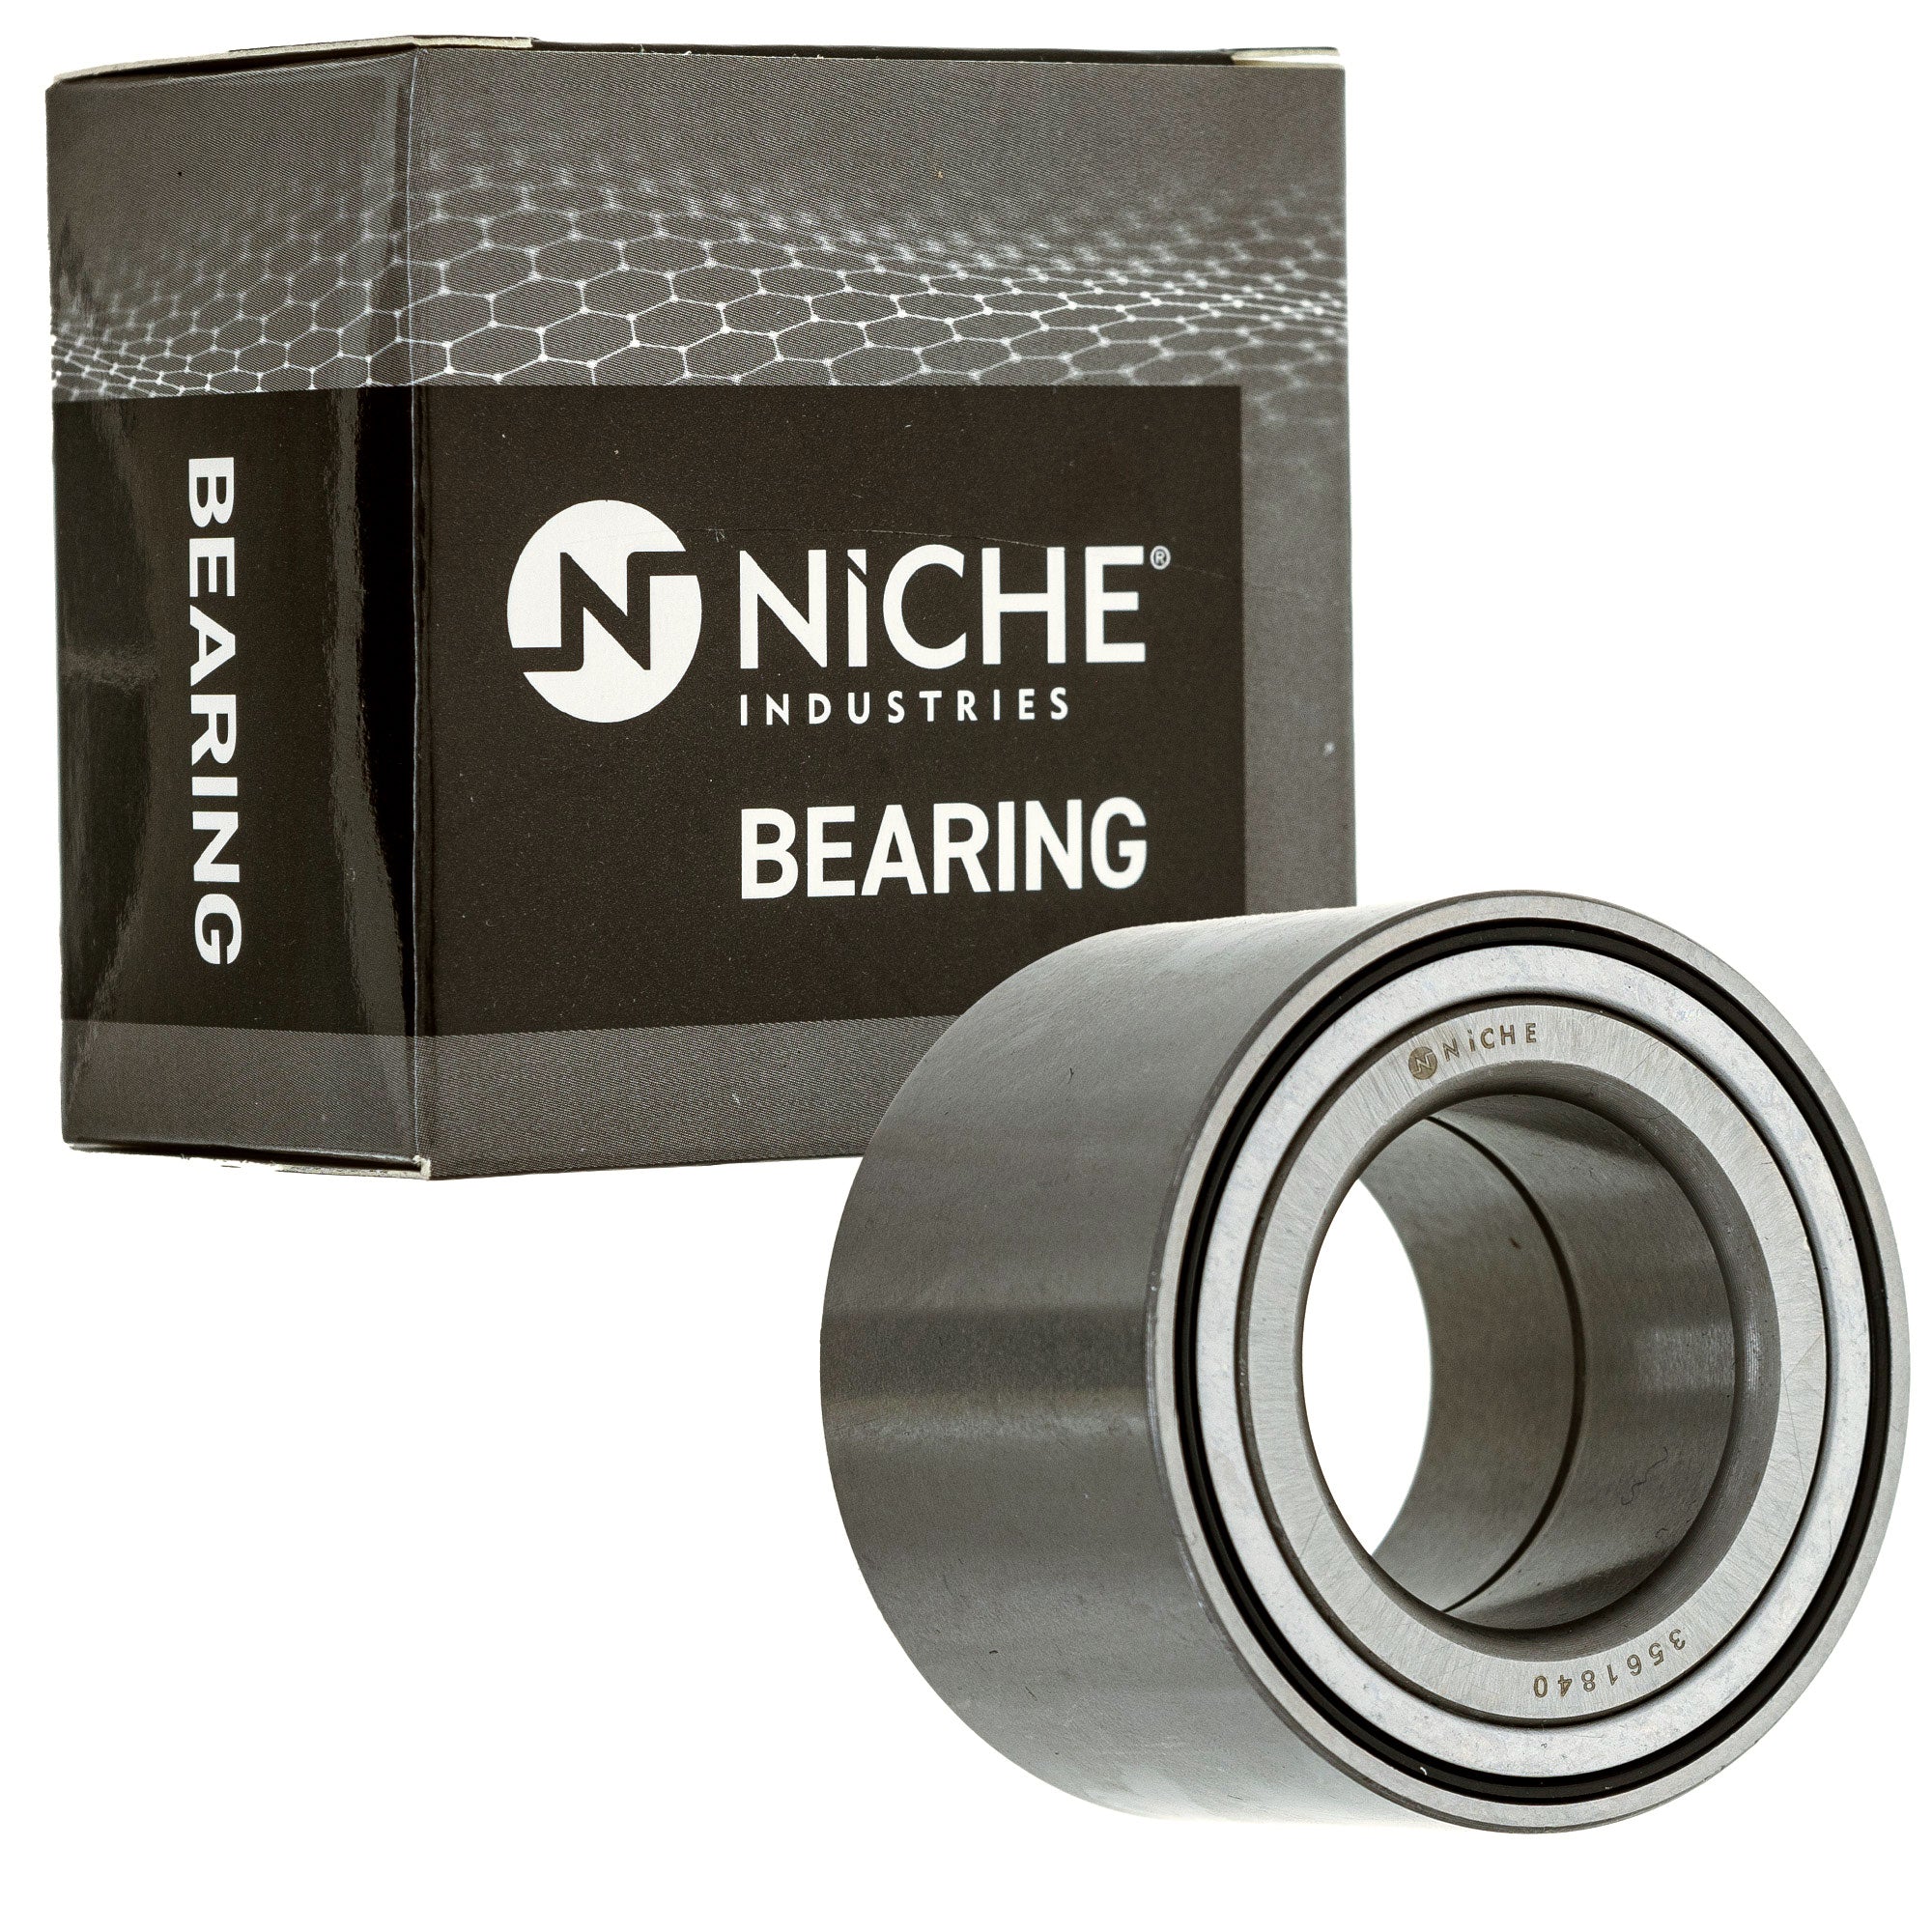 NICHE 519-CBB2216R Bearing 10-Pack for zOTHER King Concours